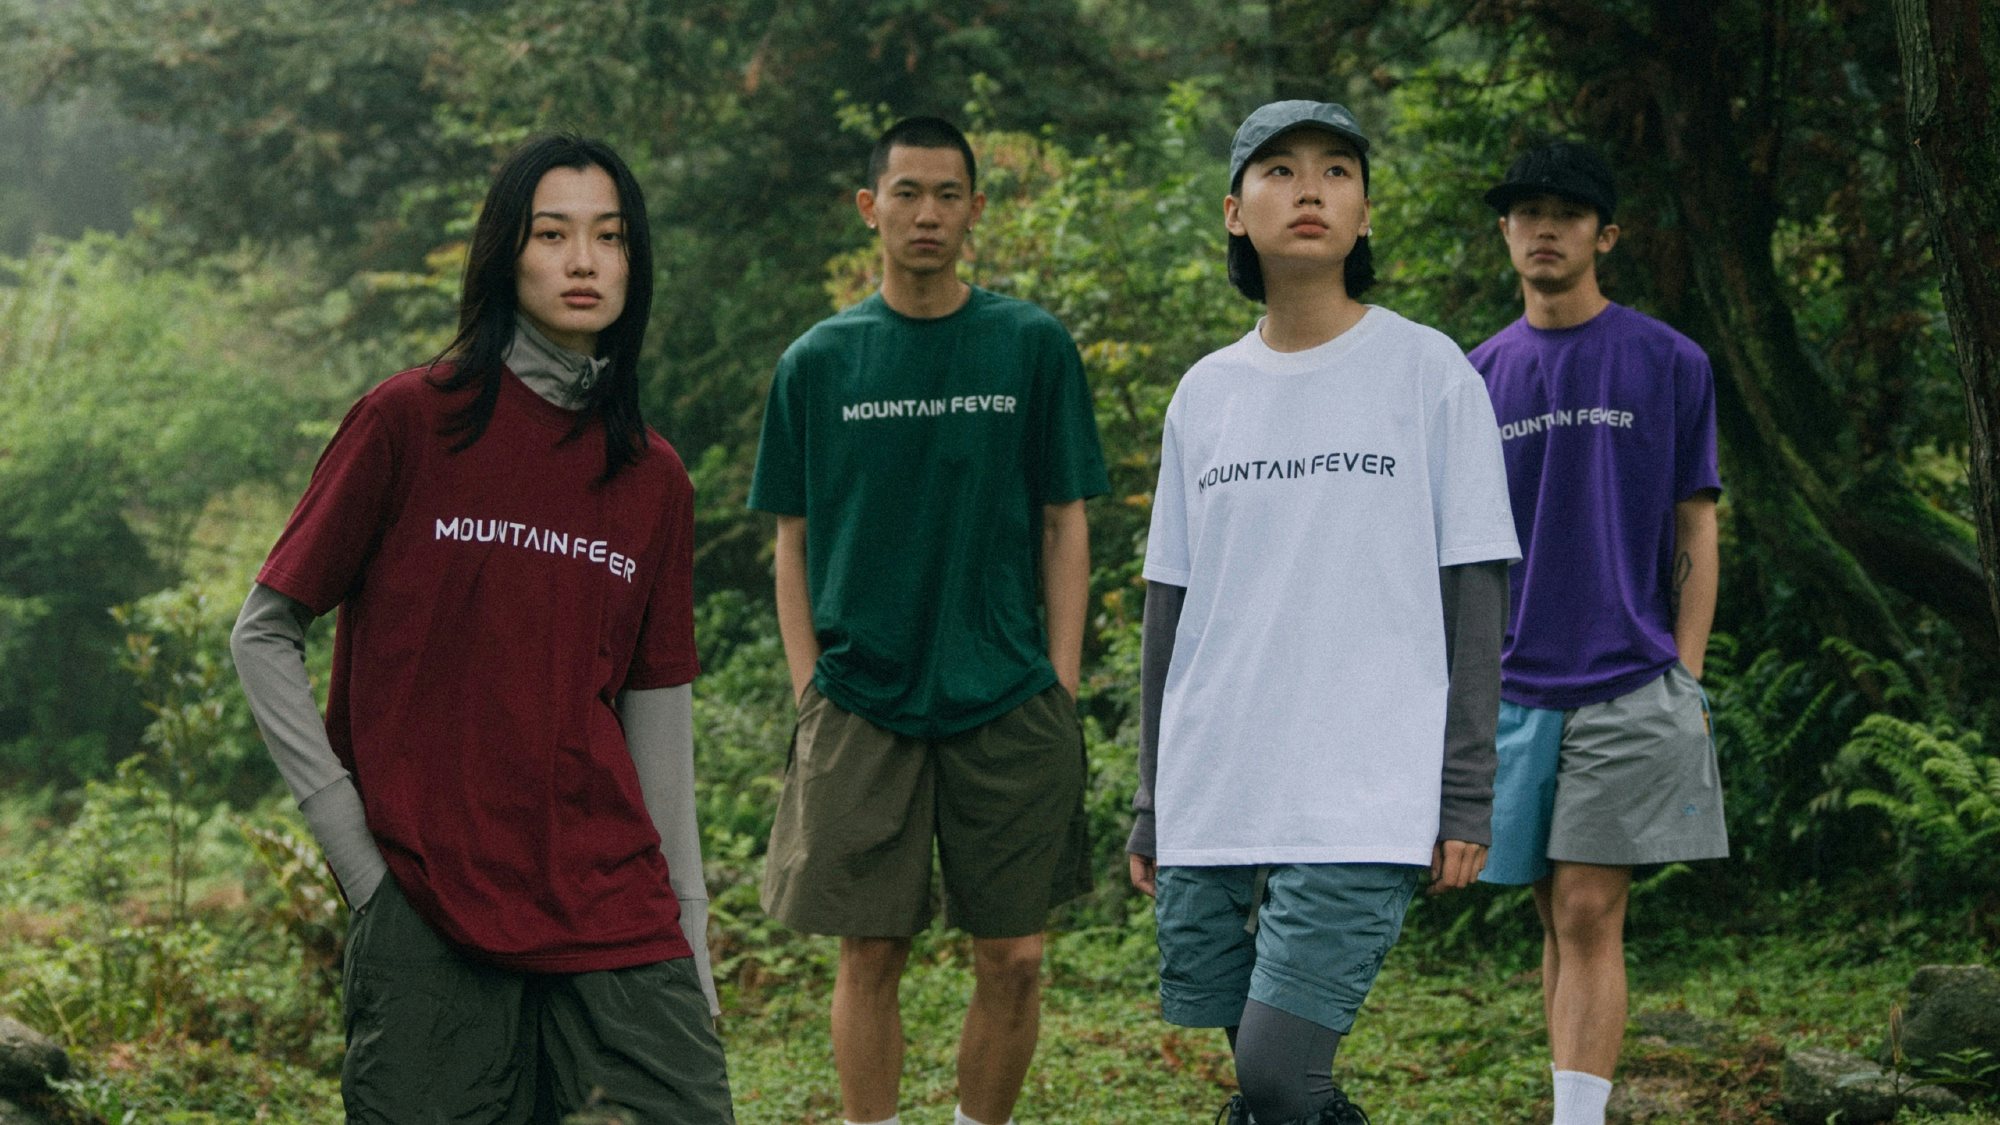  "Mountaincore" describes the urban outdoor aesthetic that has taken social media by storm. Local buyer stores and homegrown labels are rushing to cater to consumers' growing appetite for this new youth trend. Photo: Mountain Fever